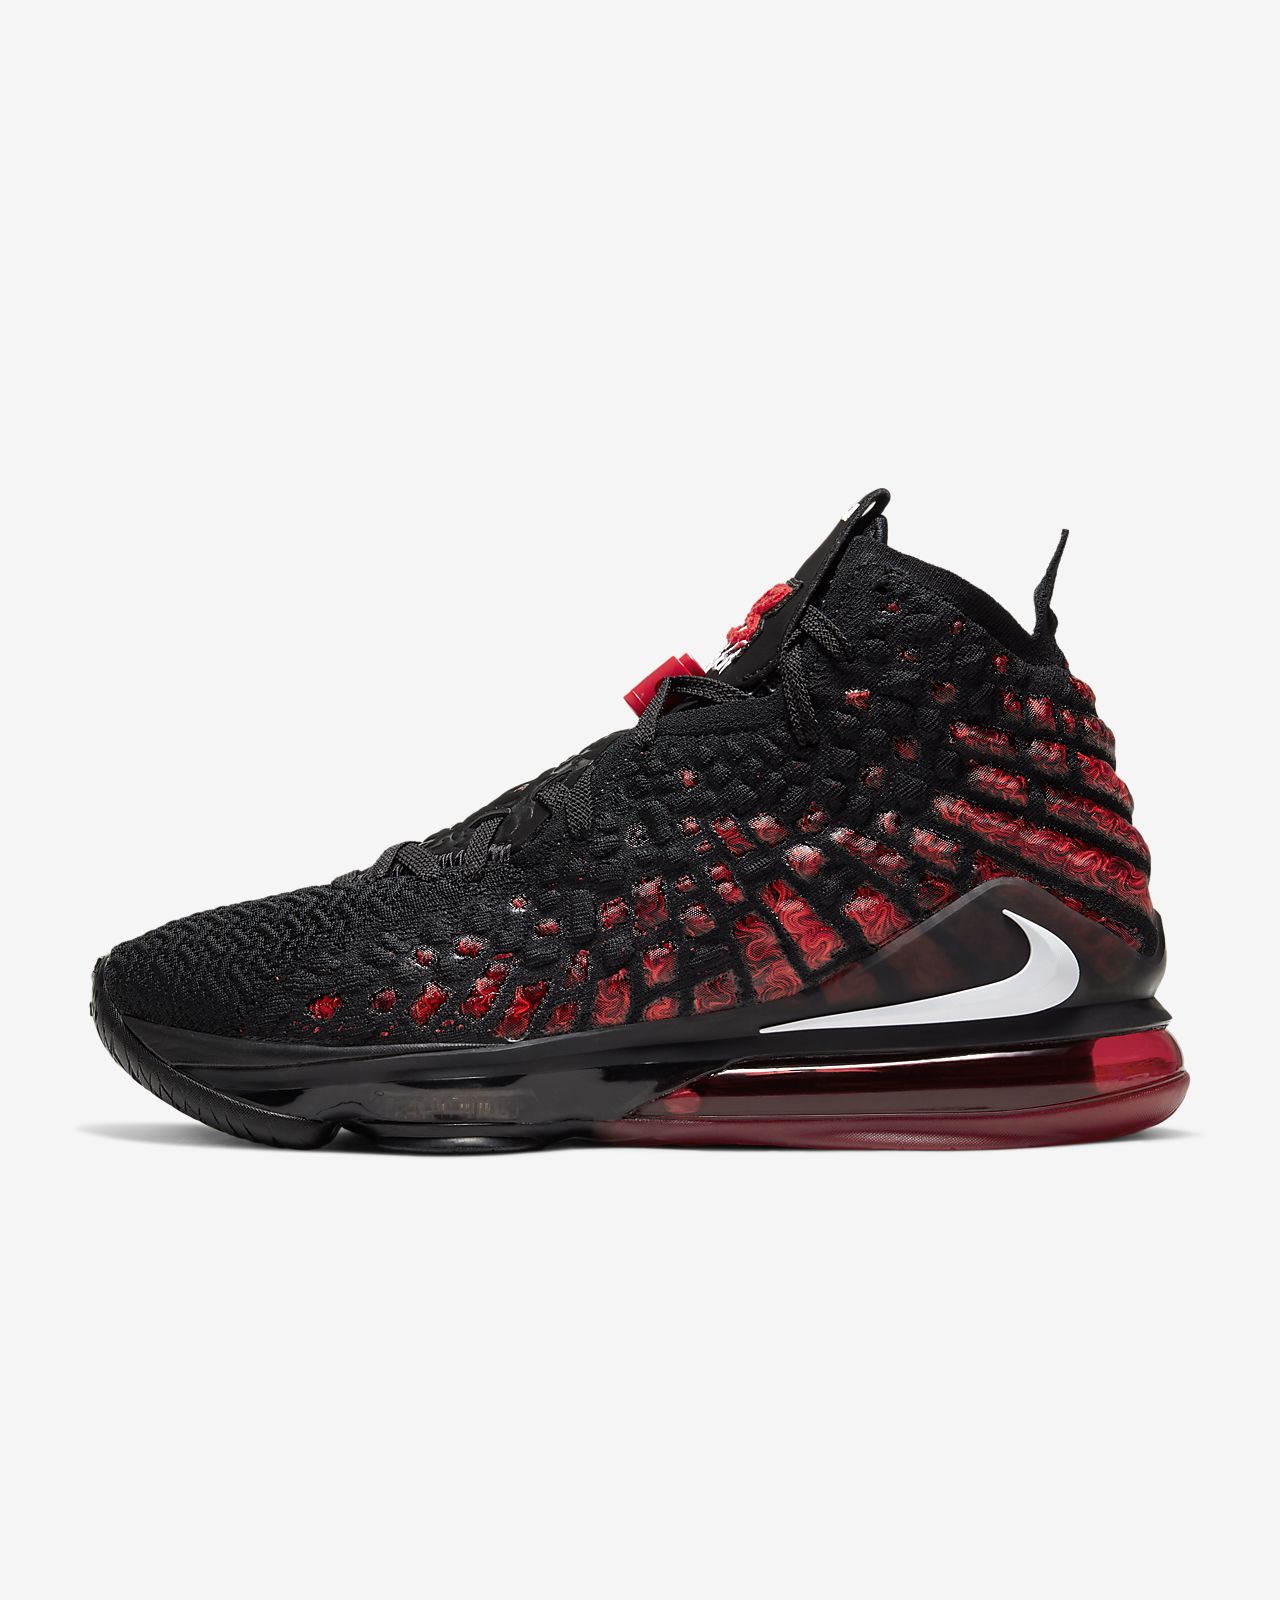 lebron 17 black and red